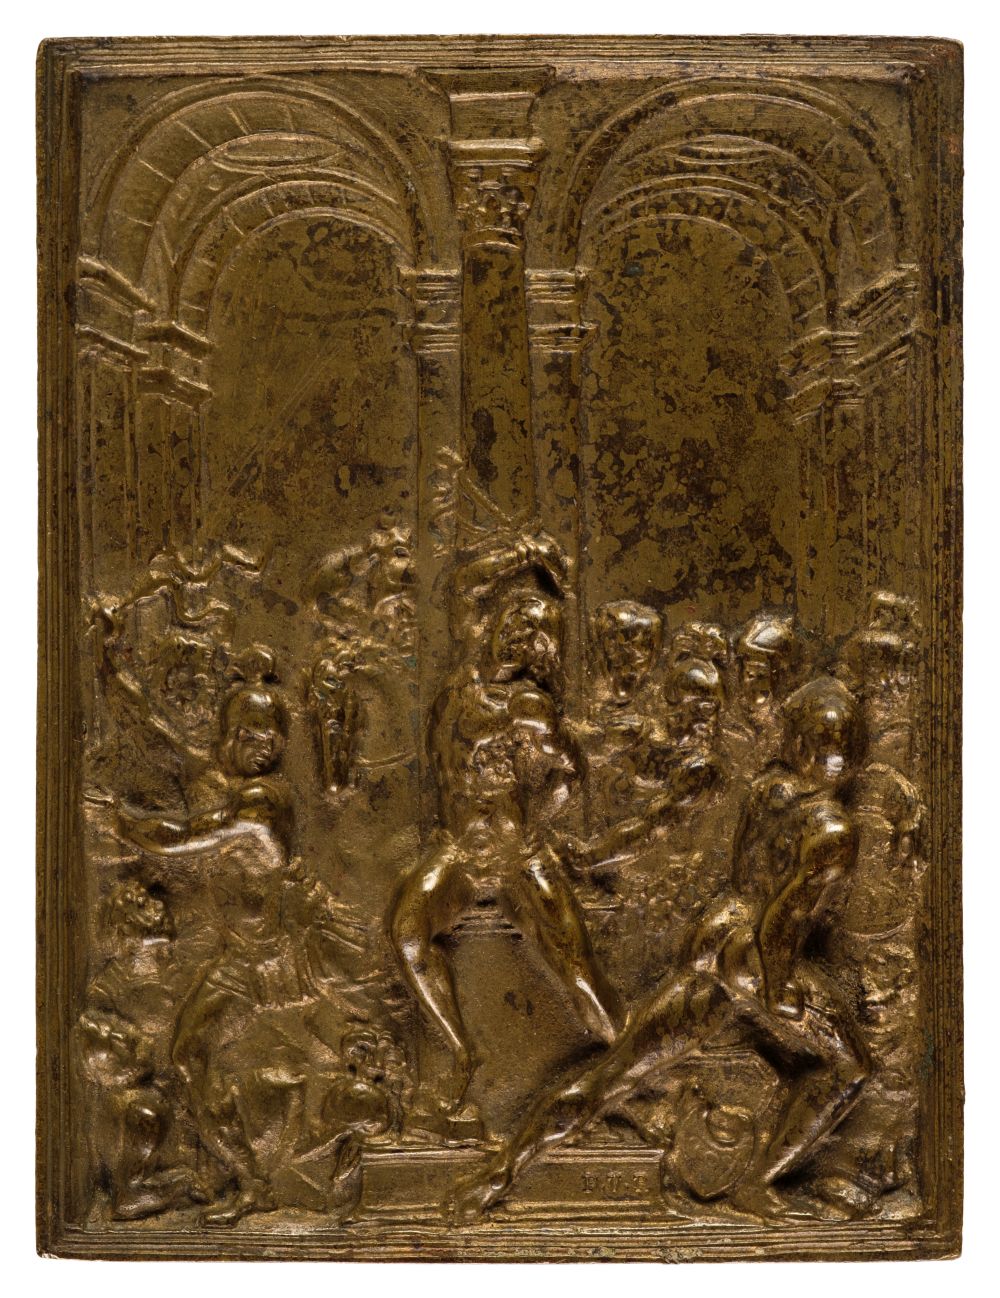 * Moderno, (1467-1528, after). The Flagellation of Christ, 2nd quarter 19th century